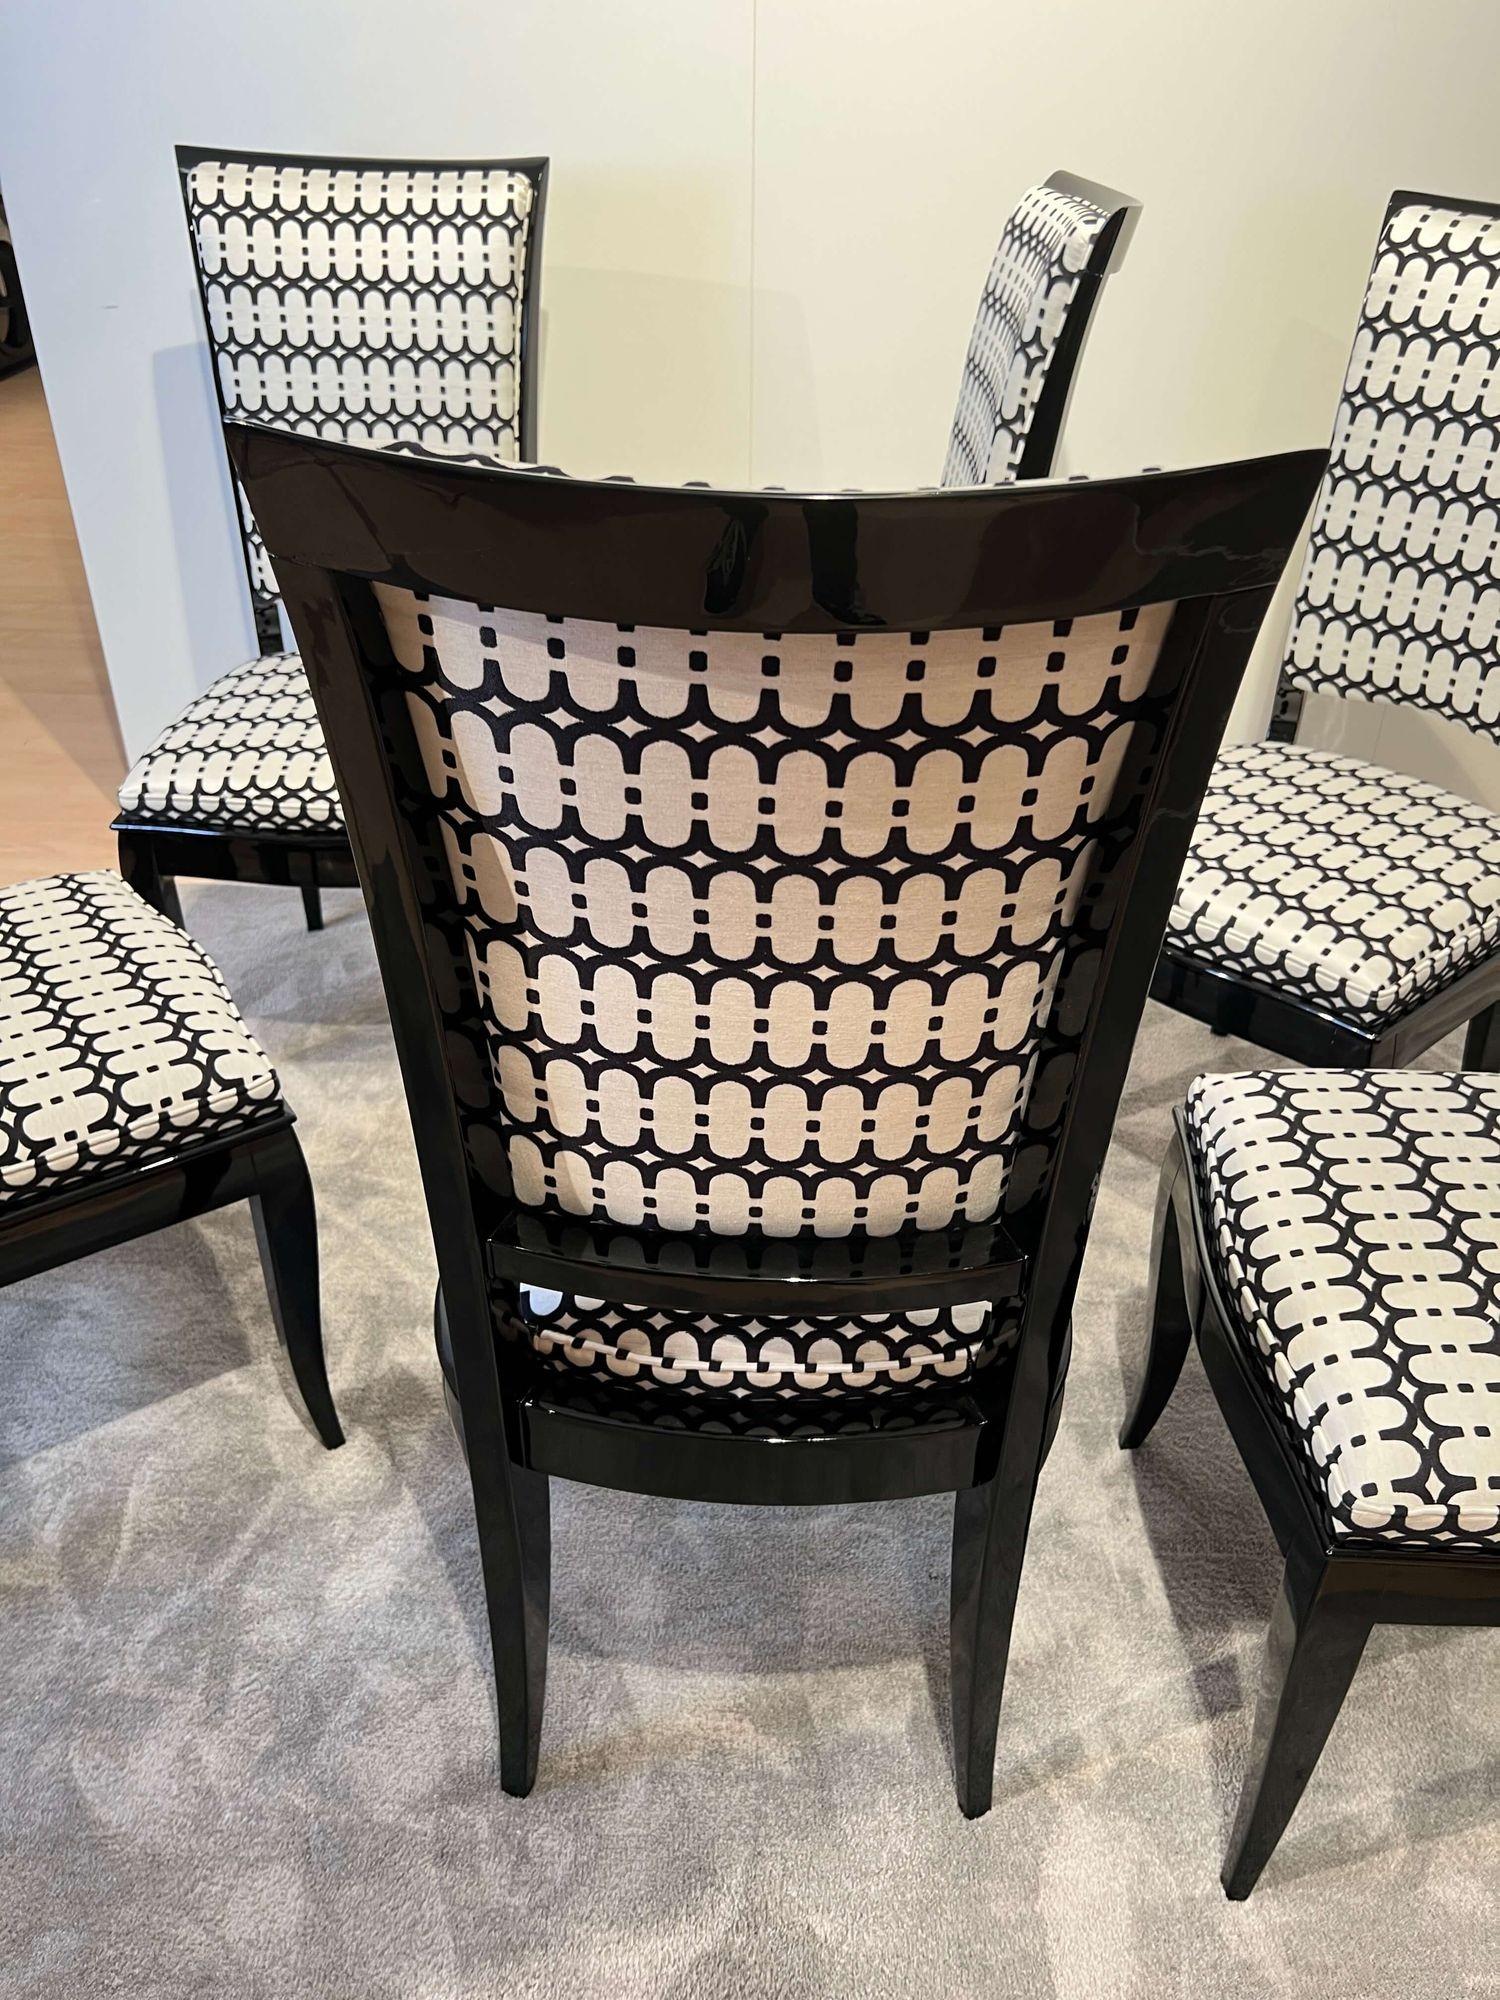 Set of Six Art Deco High Back Dining Chairs, Black Lacquer, France, circa 1930 For Sale 3